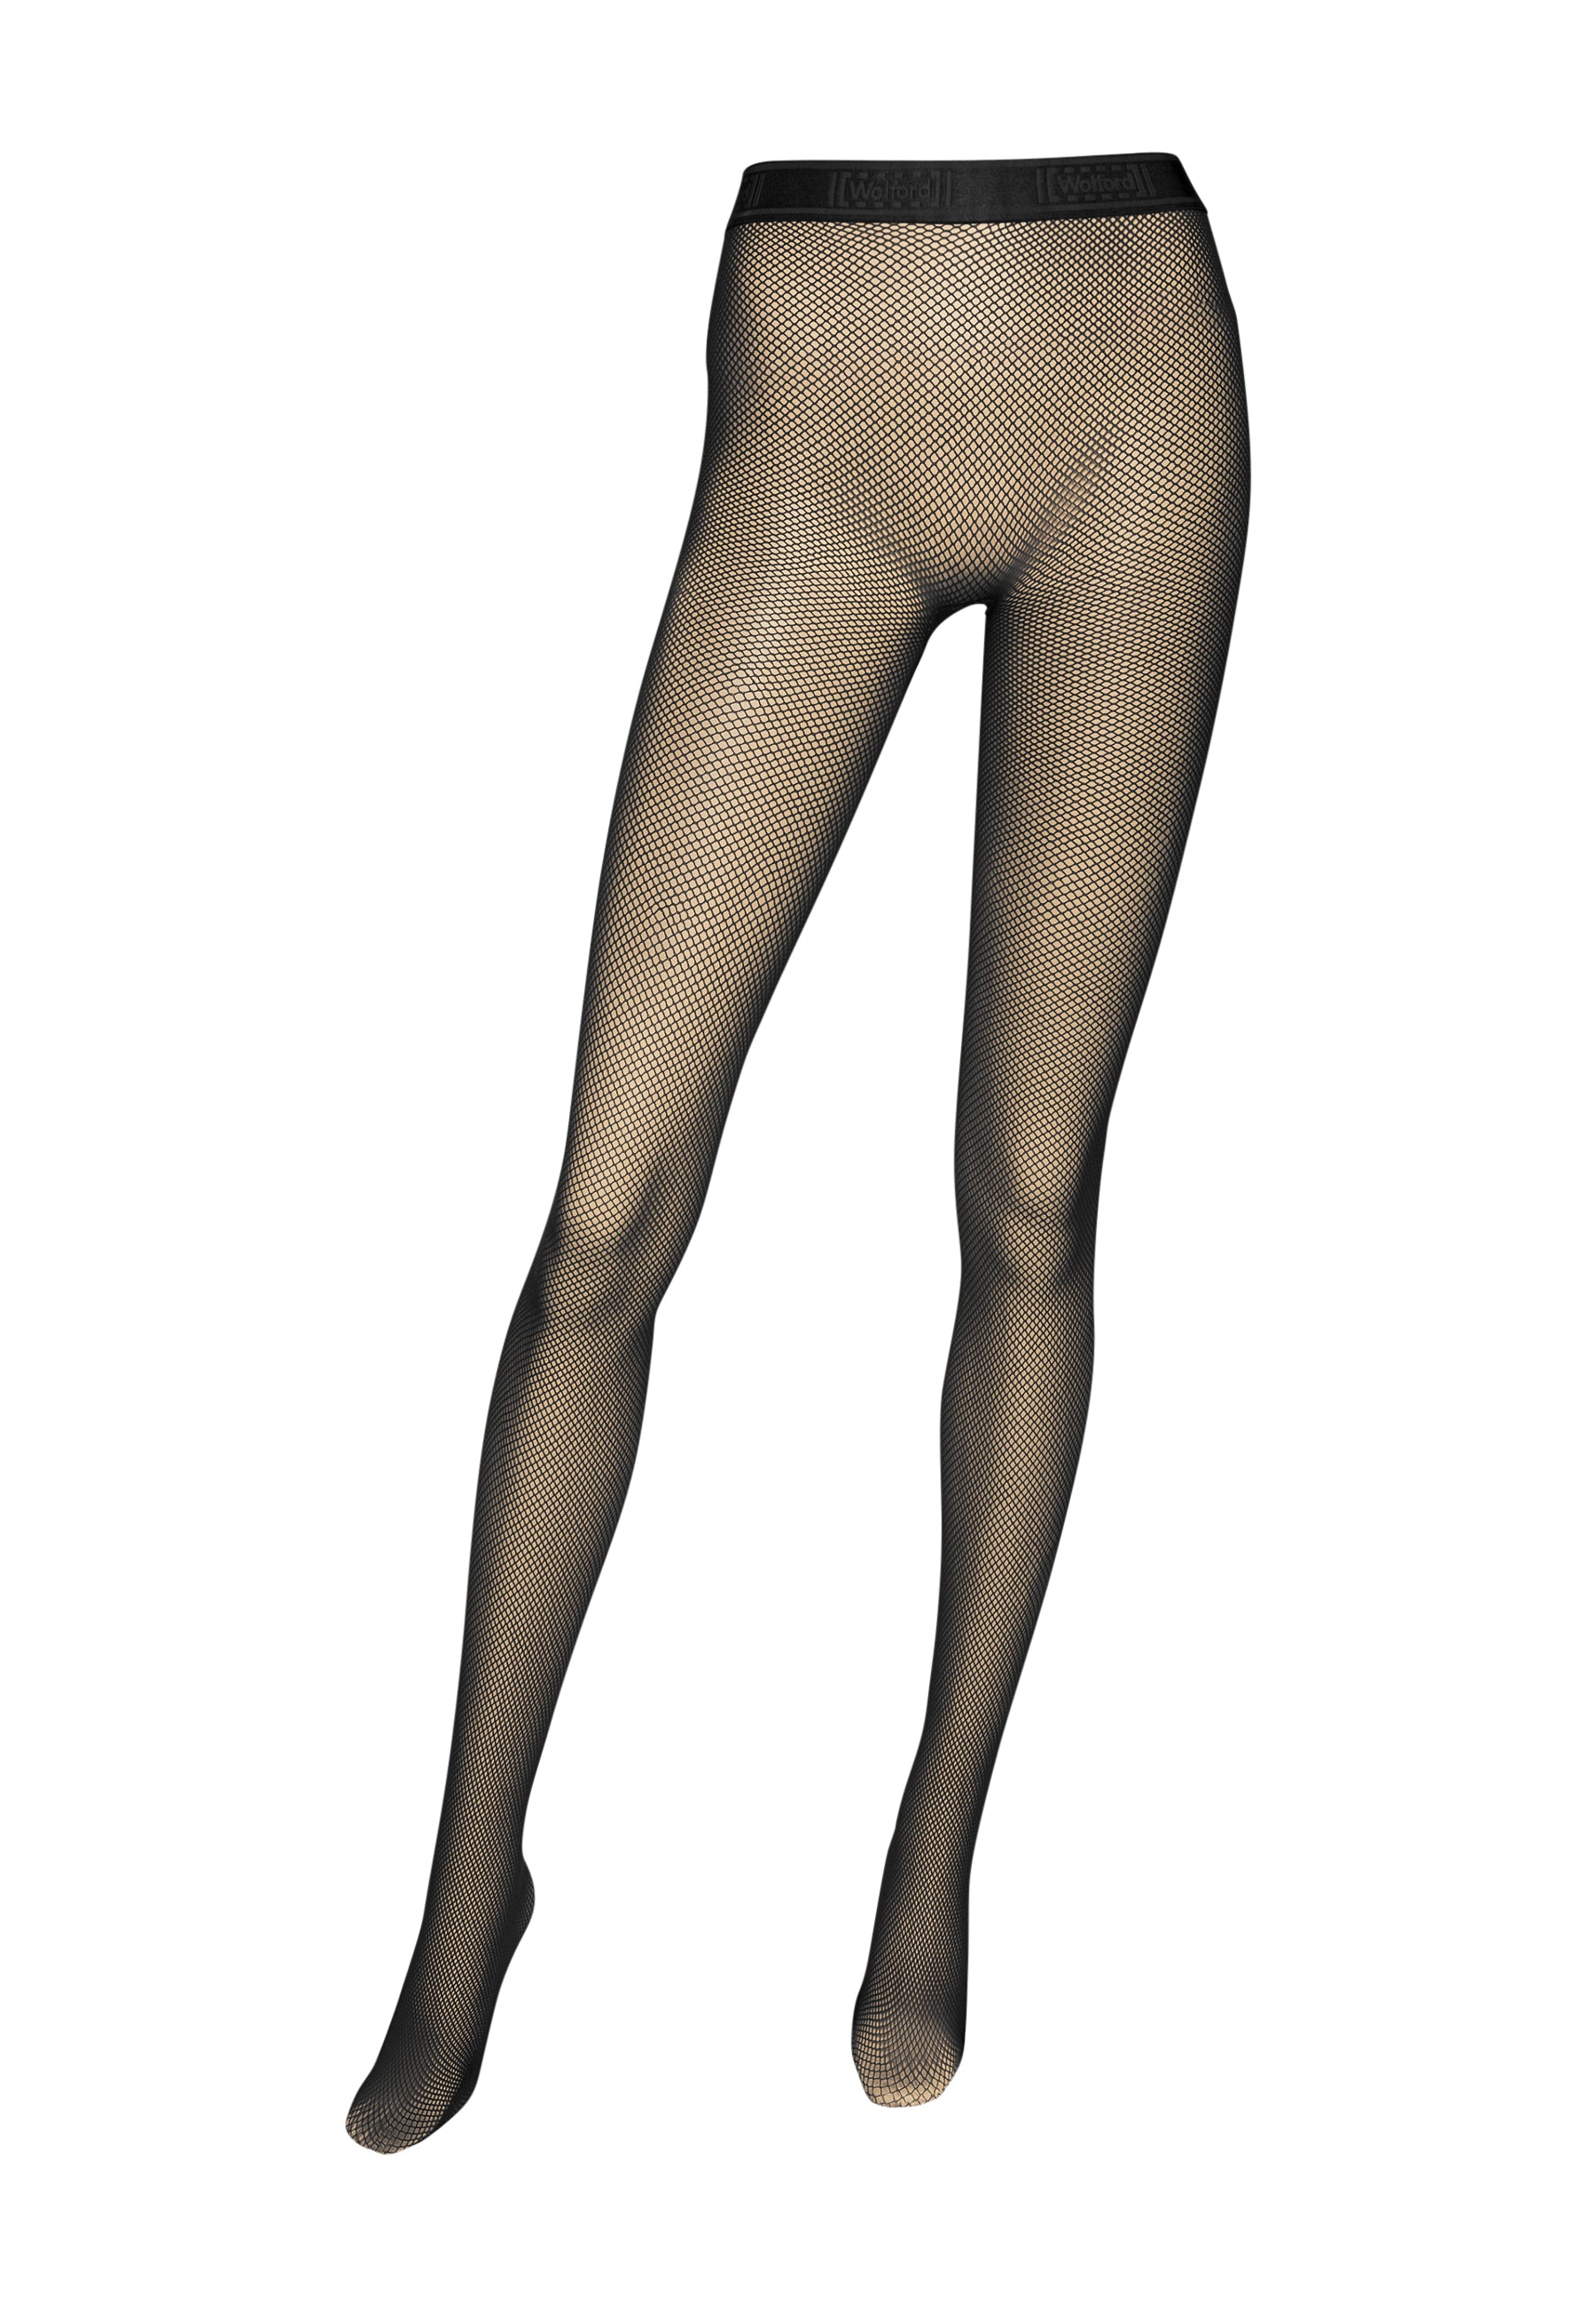 Wolford Zip Tights In Stock At UK Tights